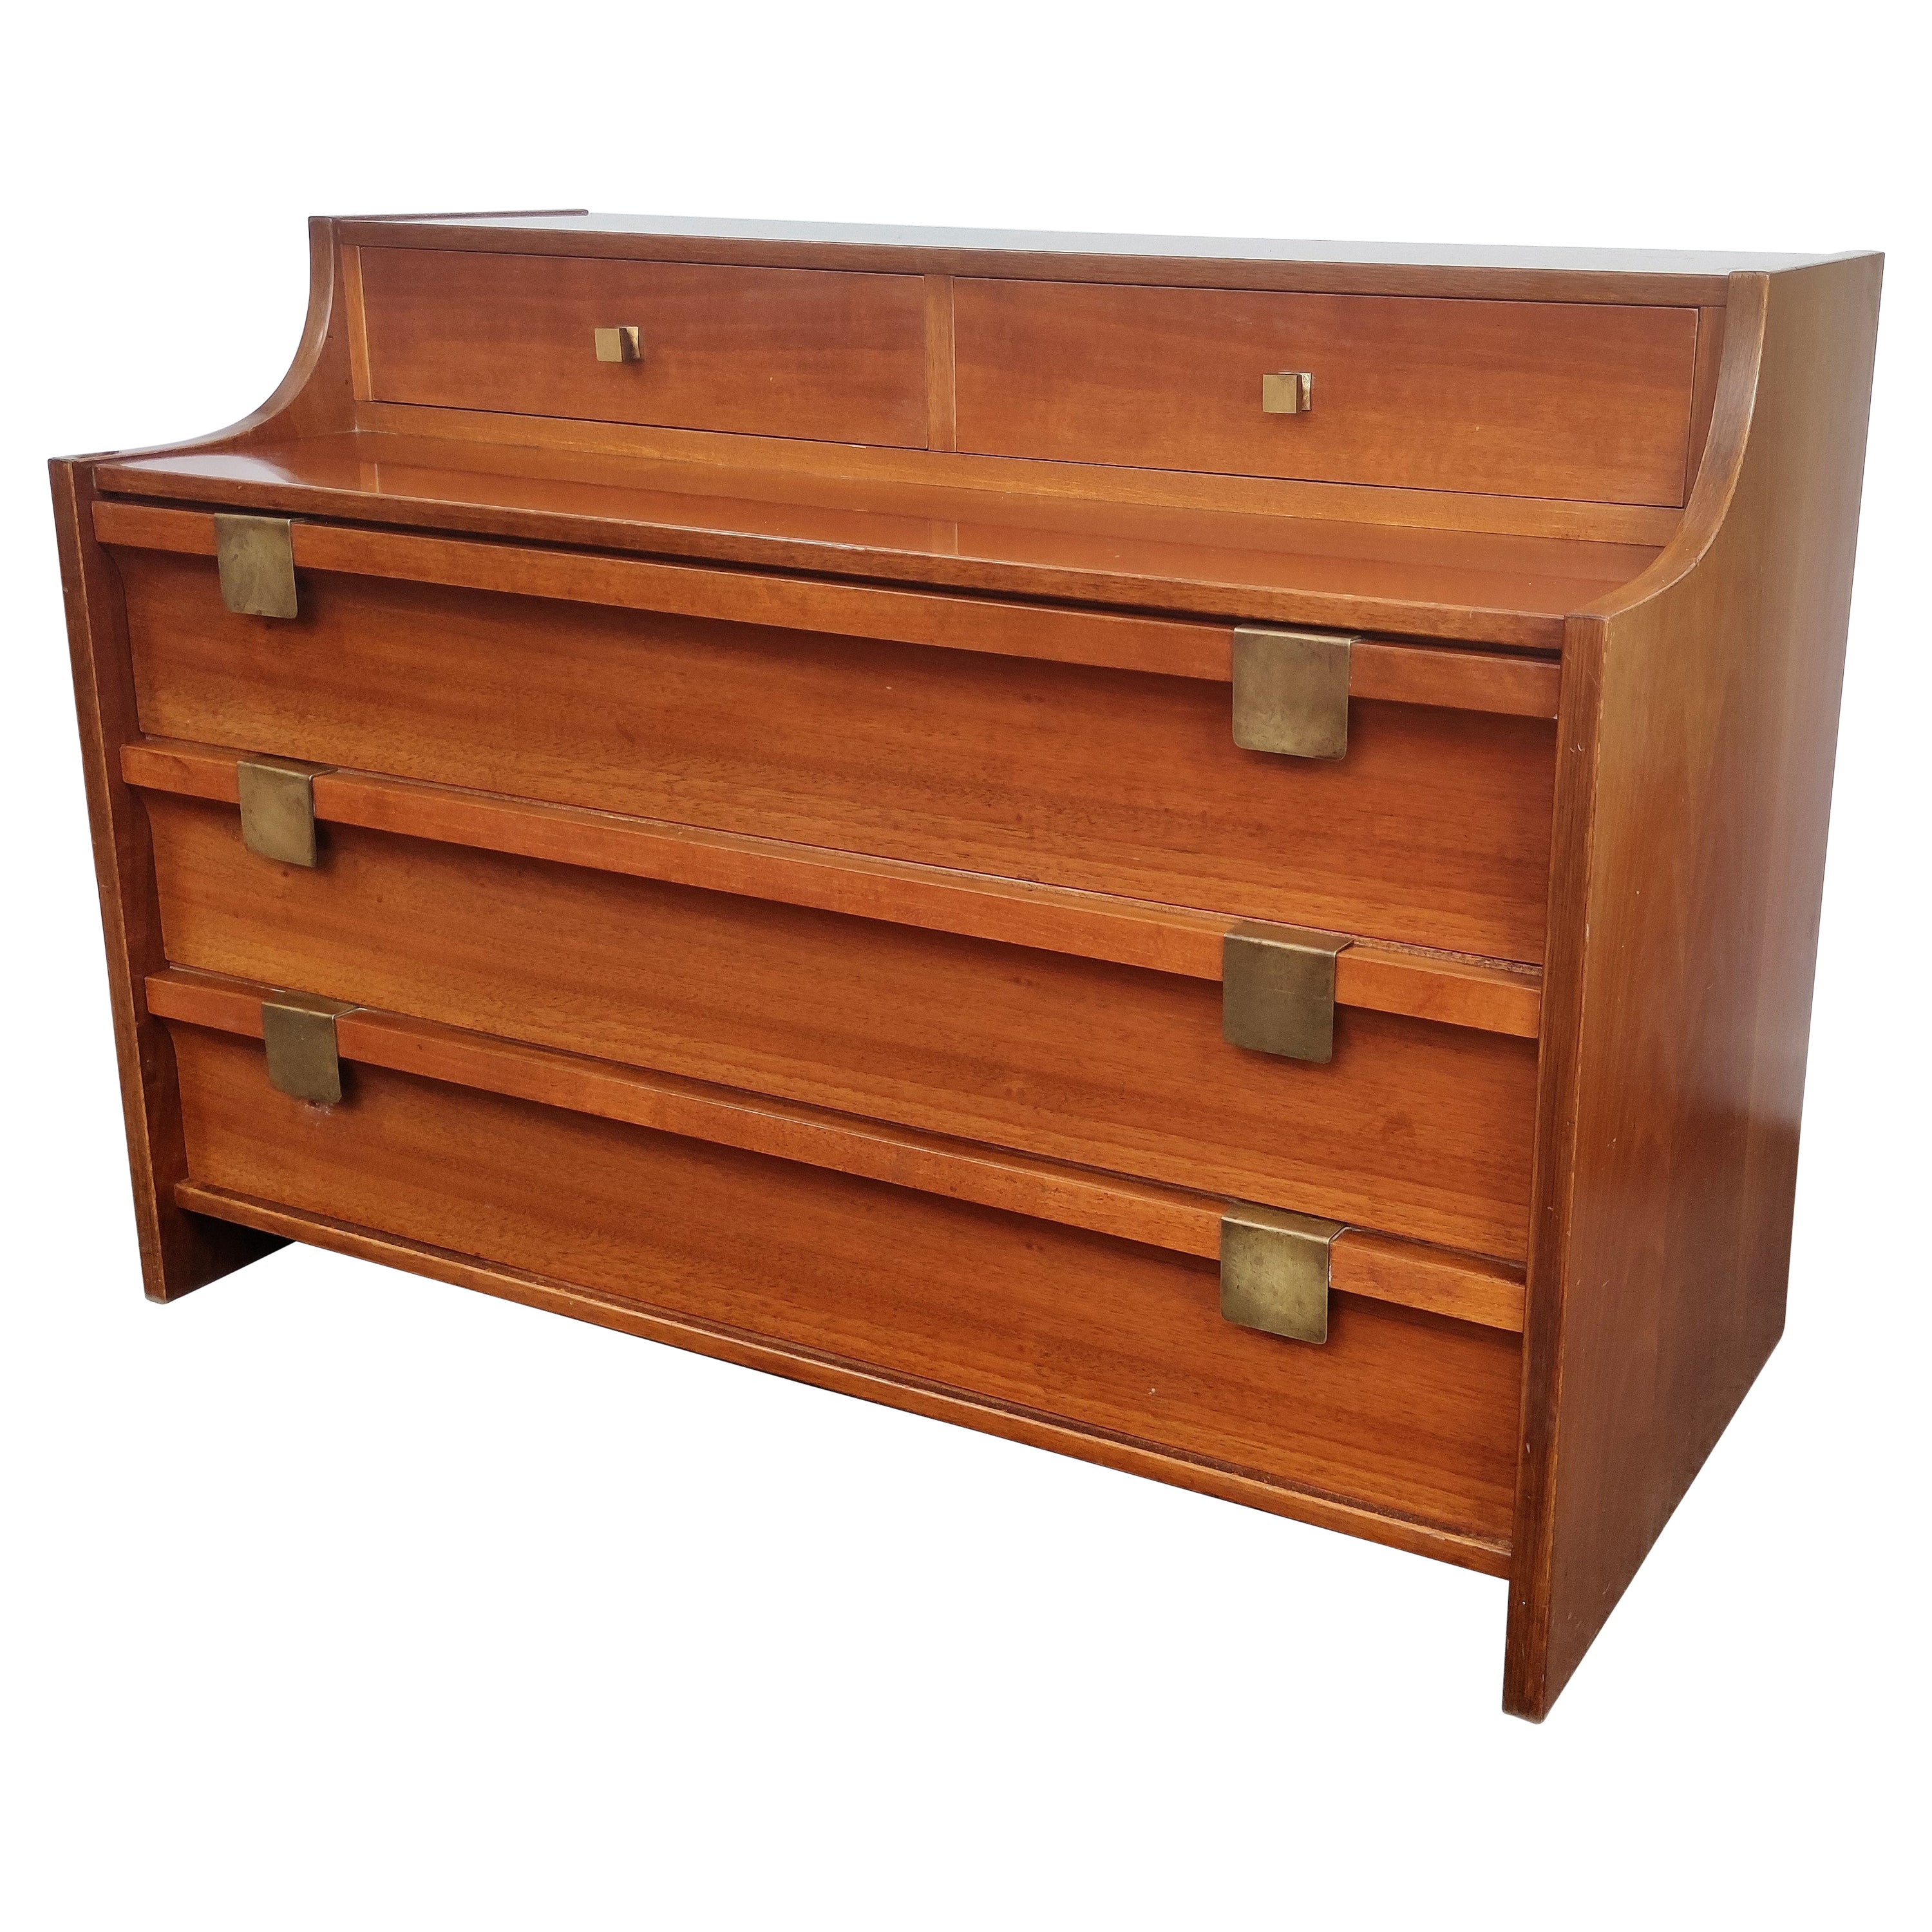 1960s Italian Mid-Century Modern Wood and Brass Commode Dresser Chest of Drawers For Sale